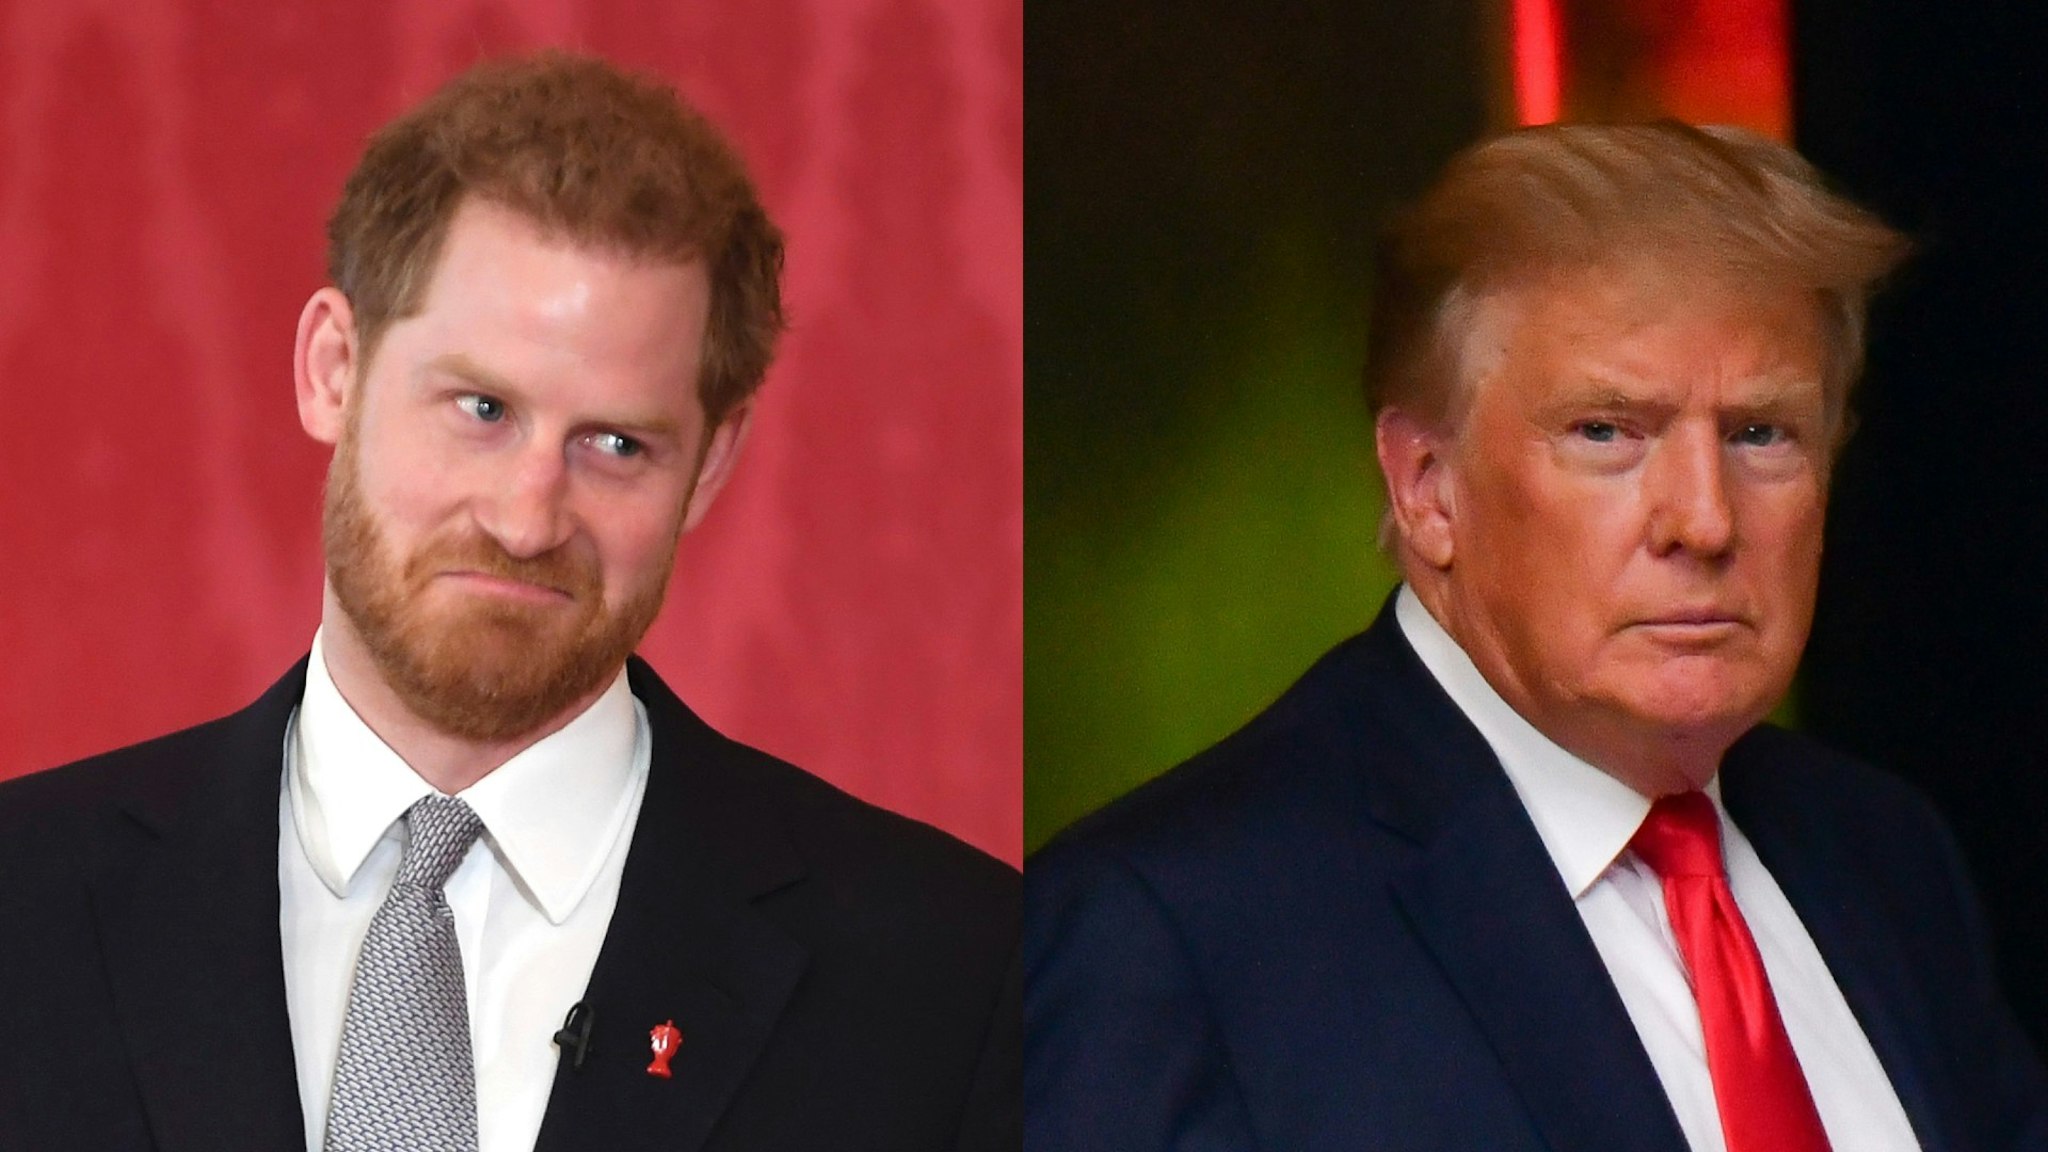 Prince Harry, Duke of Sussex, the Patron of the Rugby Football League hosts the Rugby League World Cup 2021 draws at Buckingham Palace on January 16, 2020 in London, England. Former U.S. President Donald Trump leaves Trump Tower in Manhattan on July 19, 2021 in New York City.